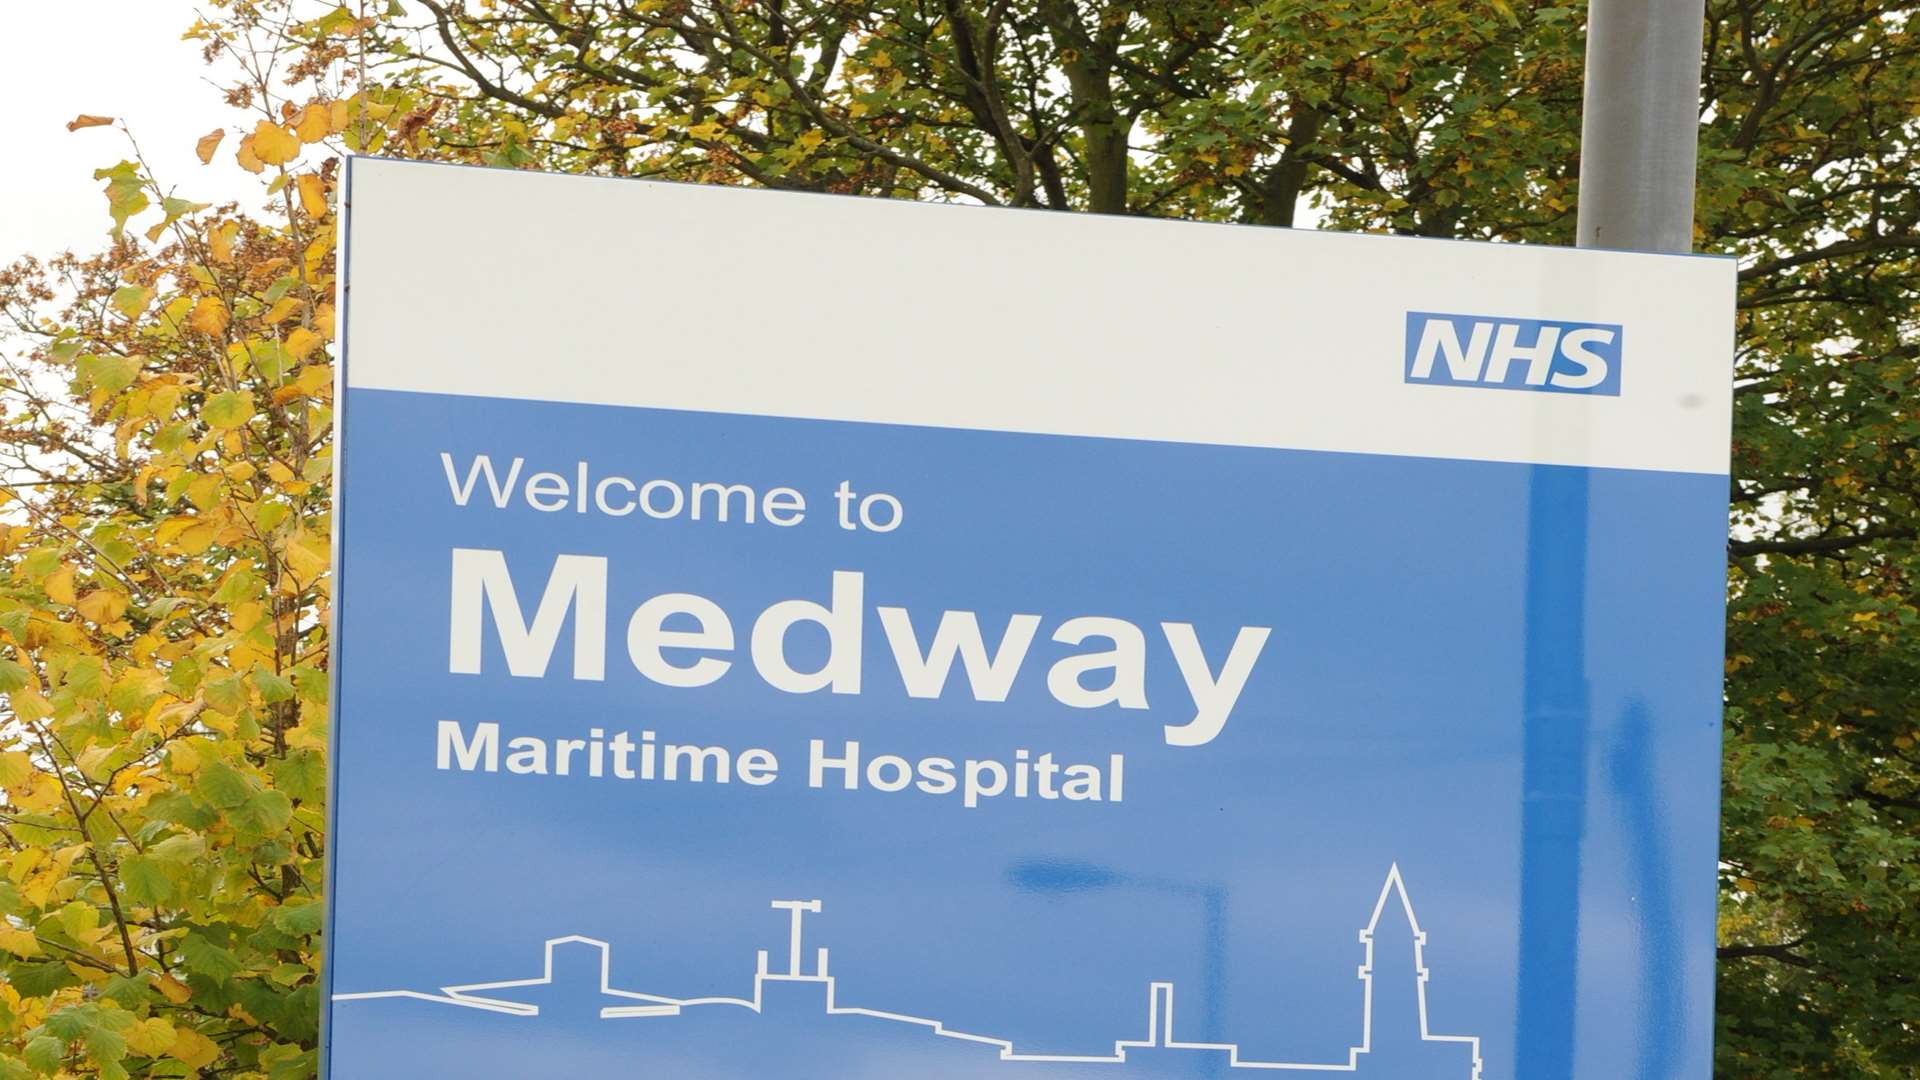 The team are based at Medway hospital